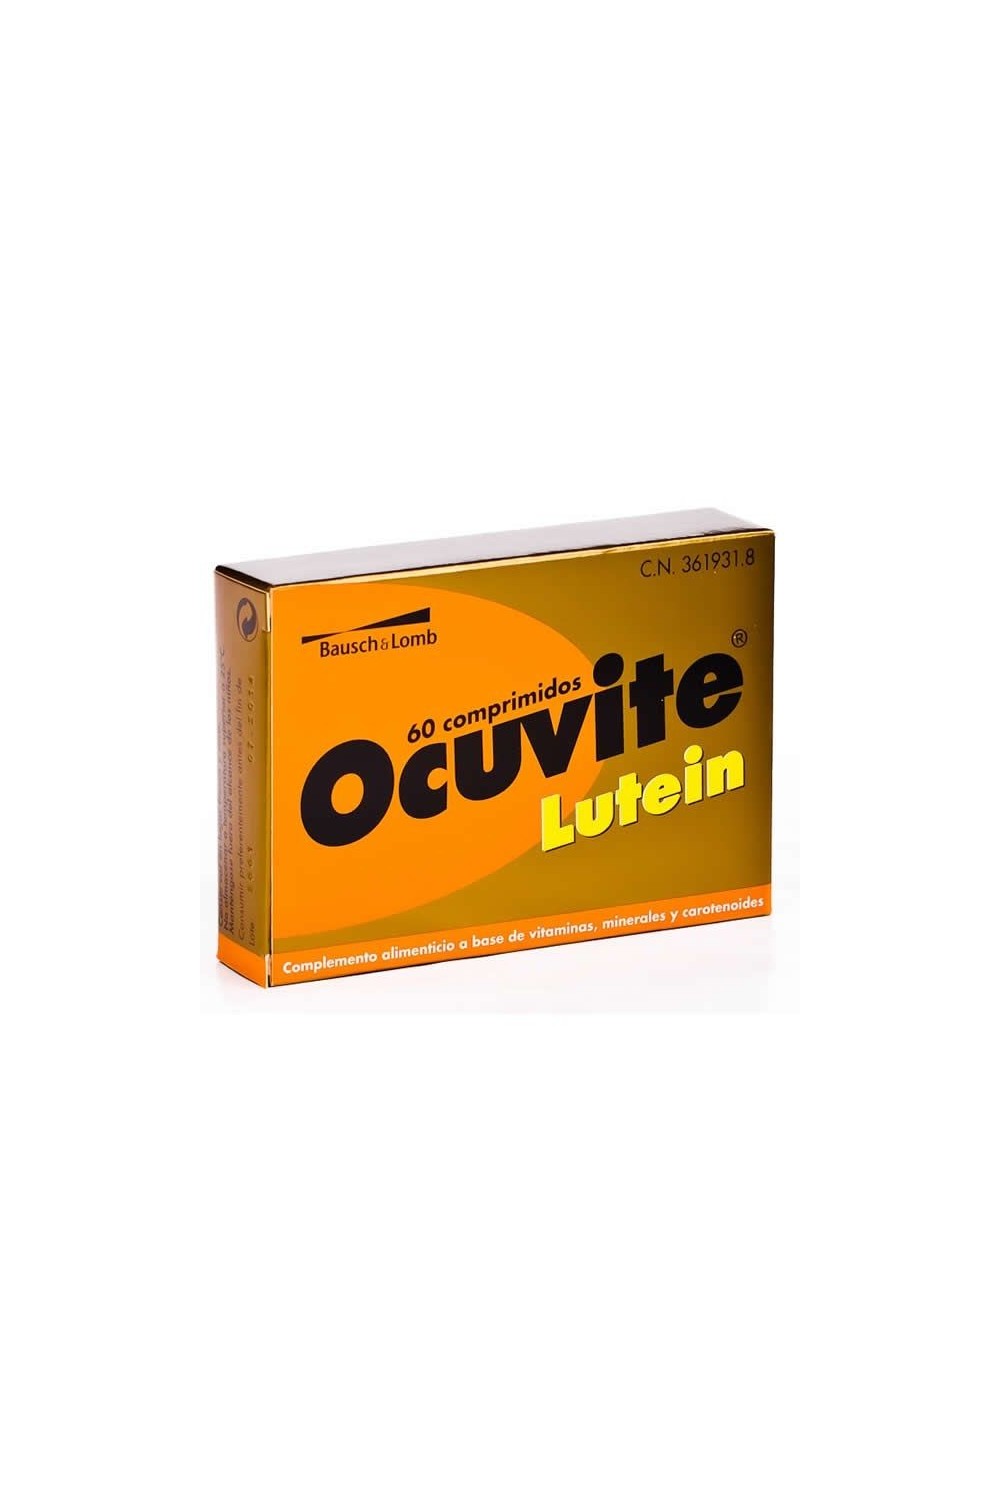 BAUSCH+LOMB - Ocuvite Lutein 60 Tablets